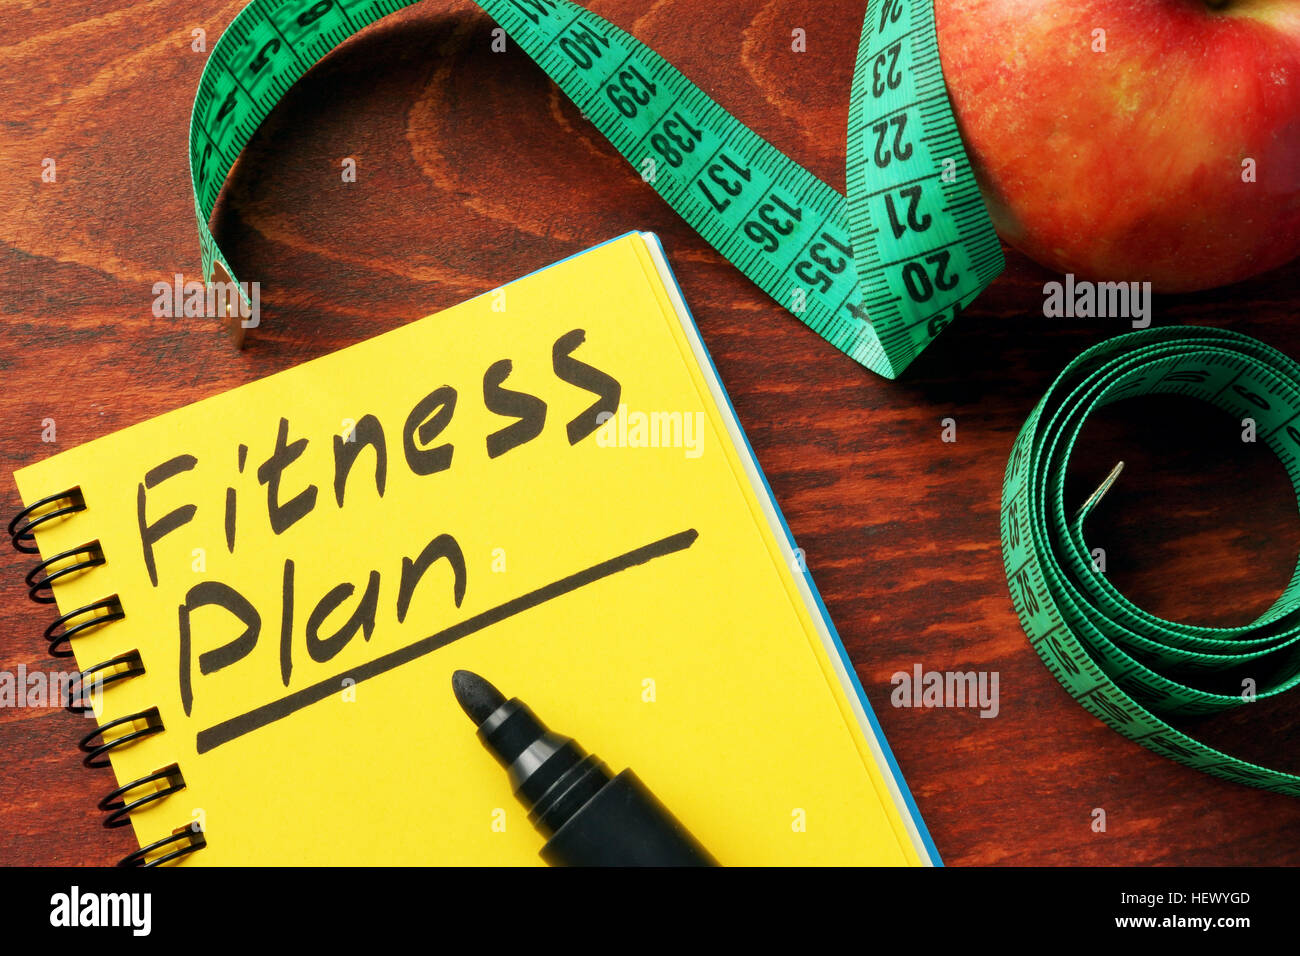 Fitness plan written in a note. Healthy lifestyle concept. Stock Photo